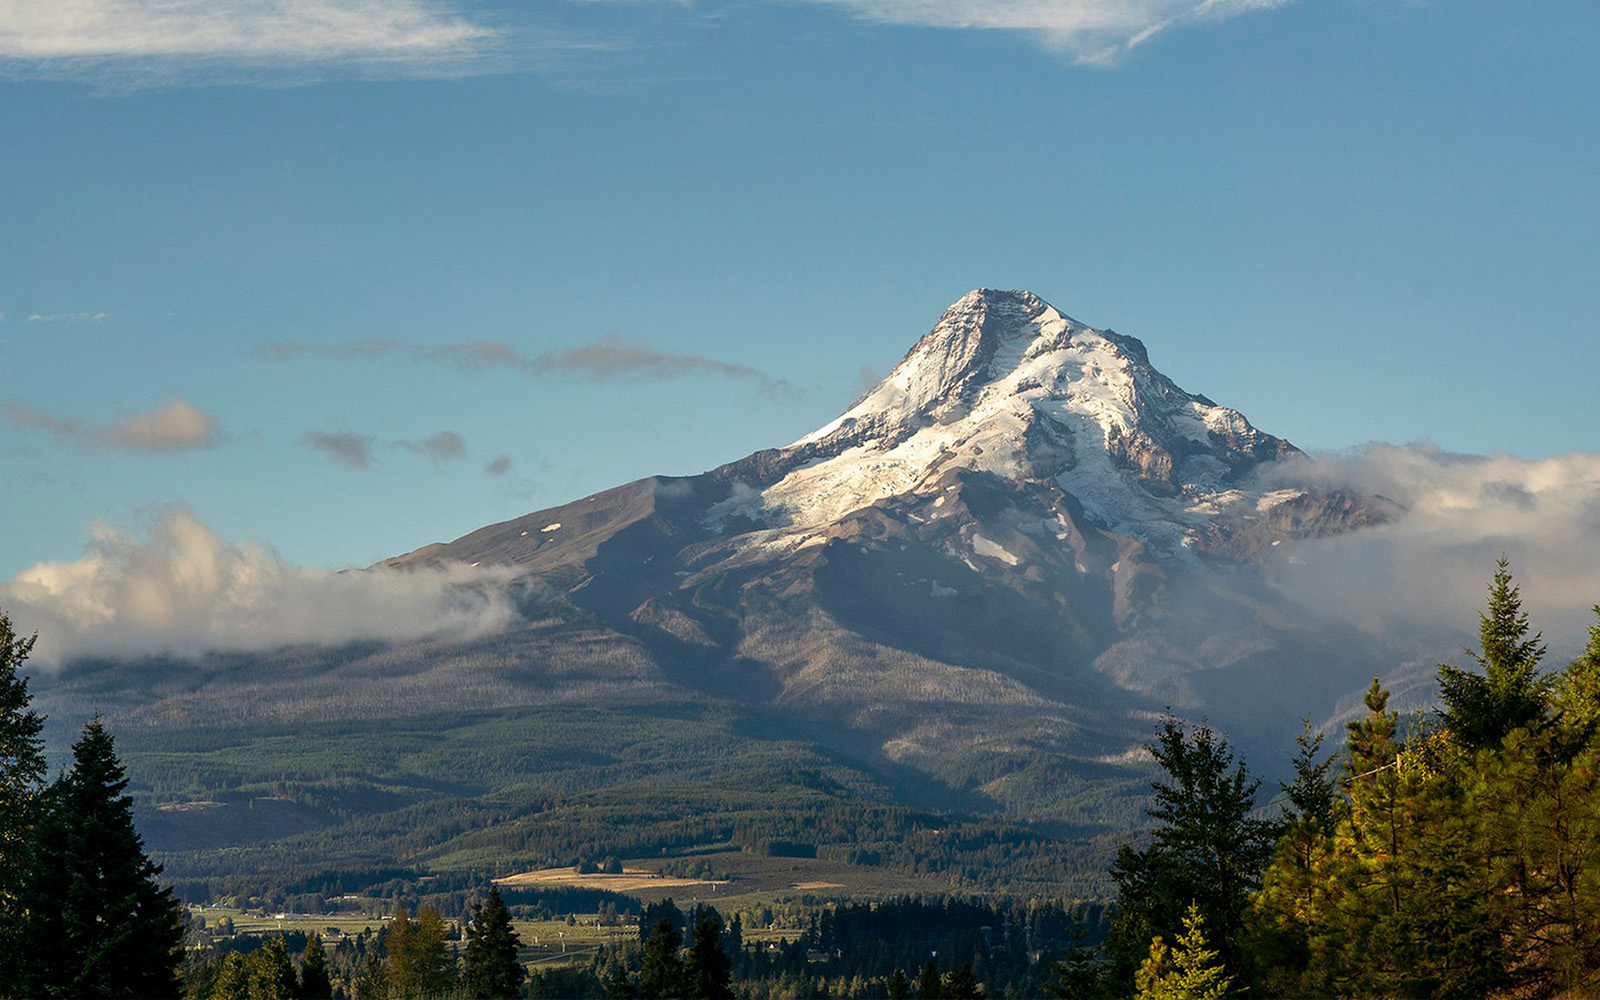 A view of Mount Hood National Forest in Oregon. USDA Forest Service photo by Cecilio Ricardo